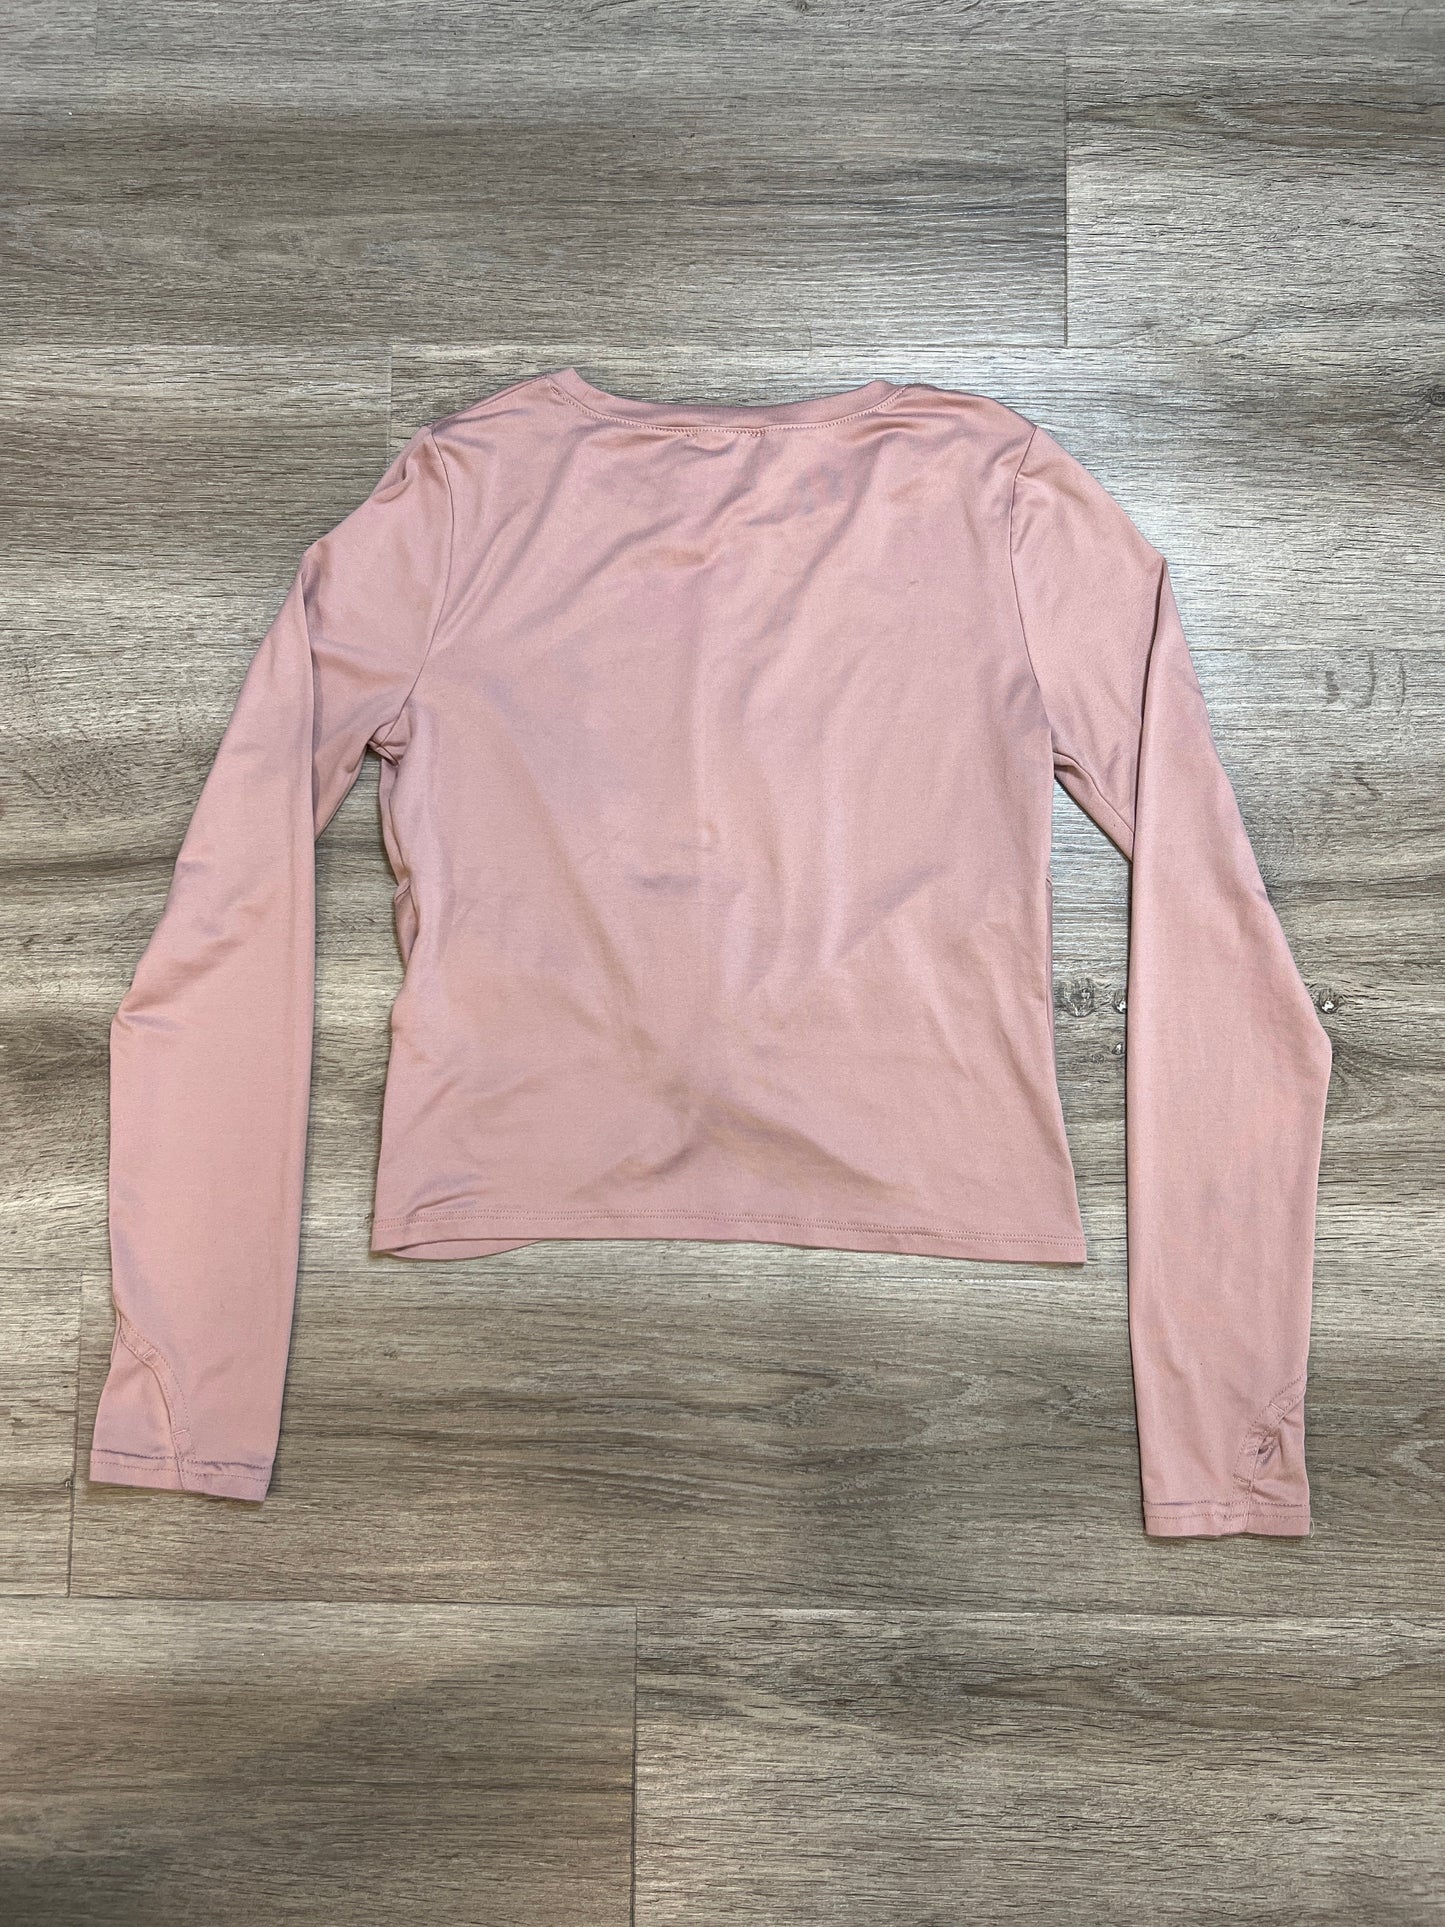 Athletic Top Long Sleeve Crewneck By Zobha  Size: S